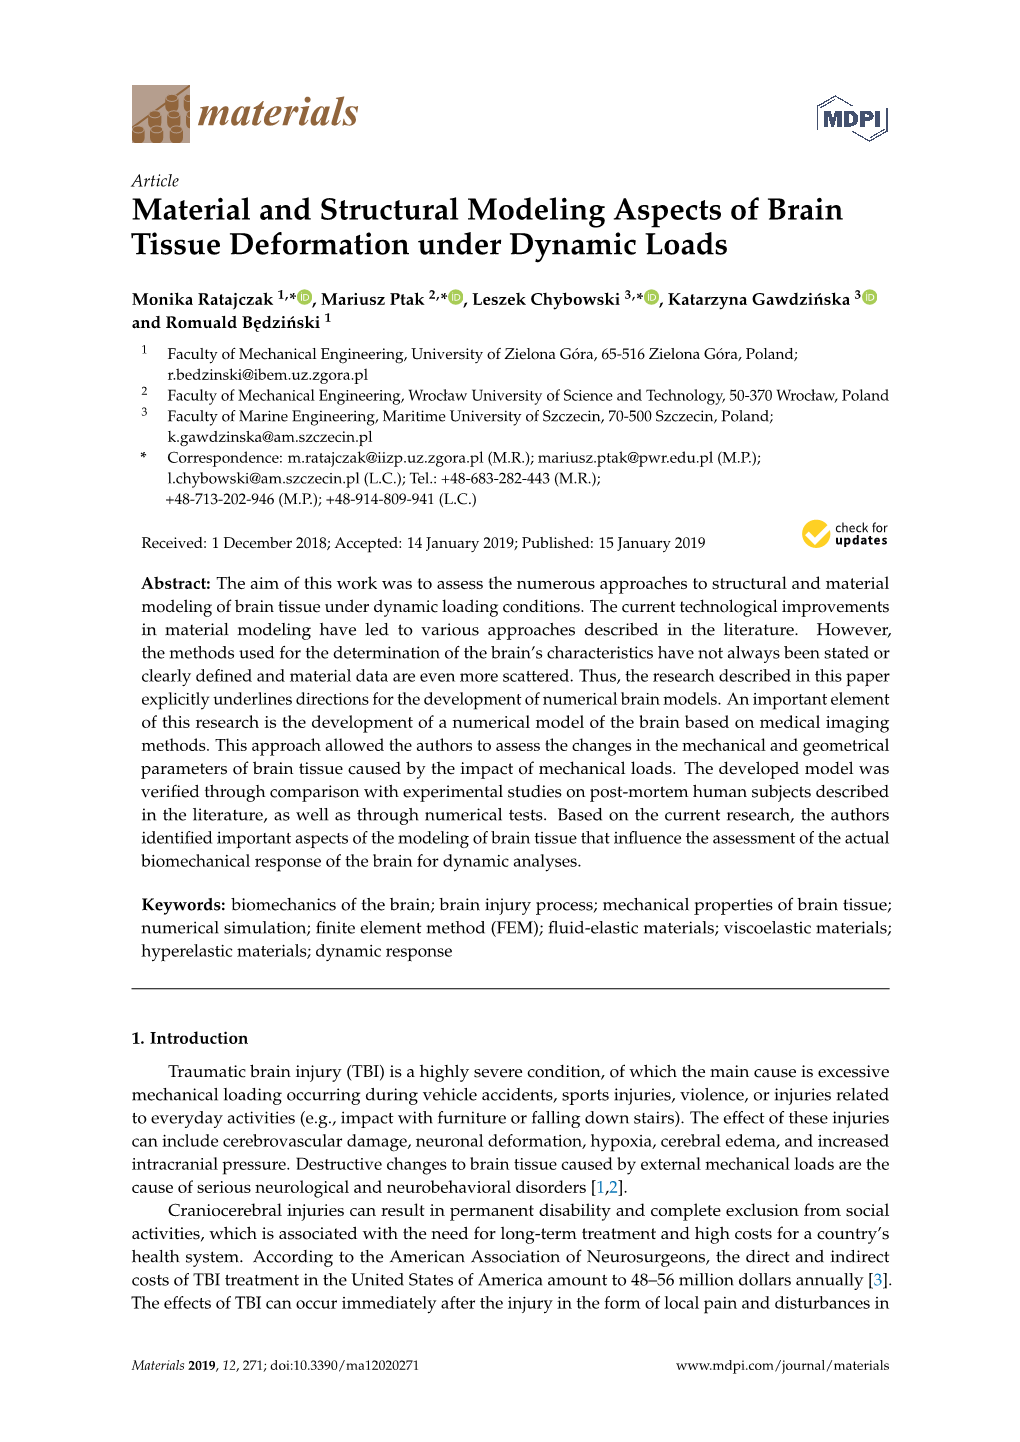 Material and Structural Modeling Aspects of Brain Tissue Deformation Under Dynamic Loads